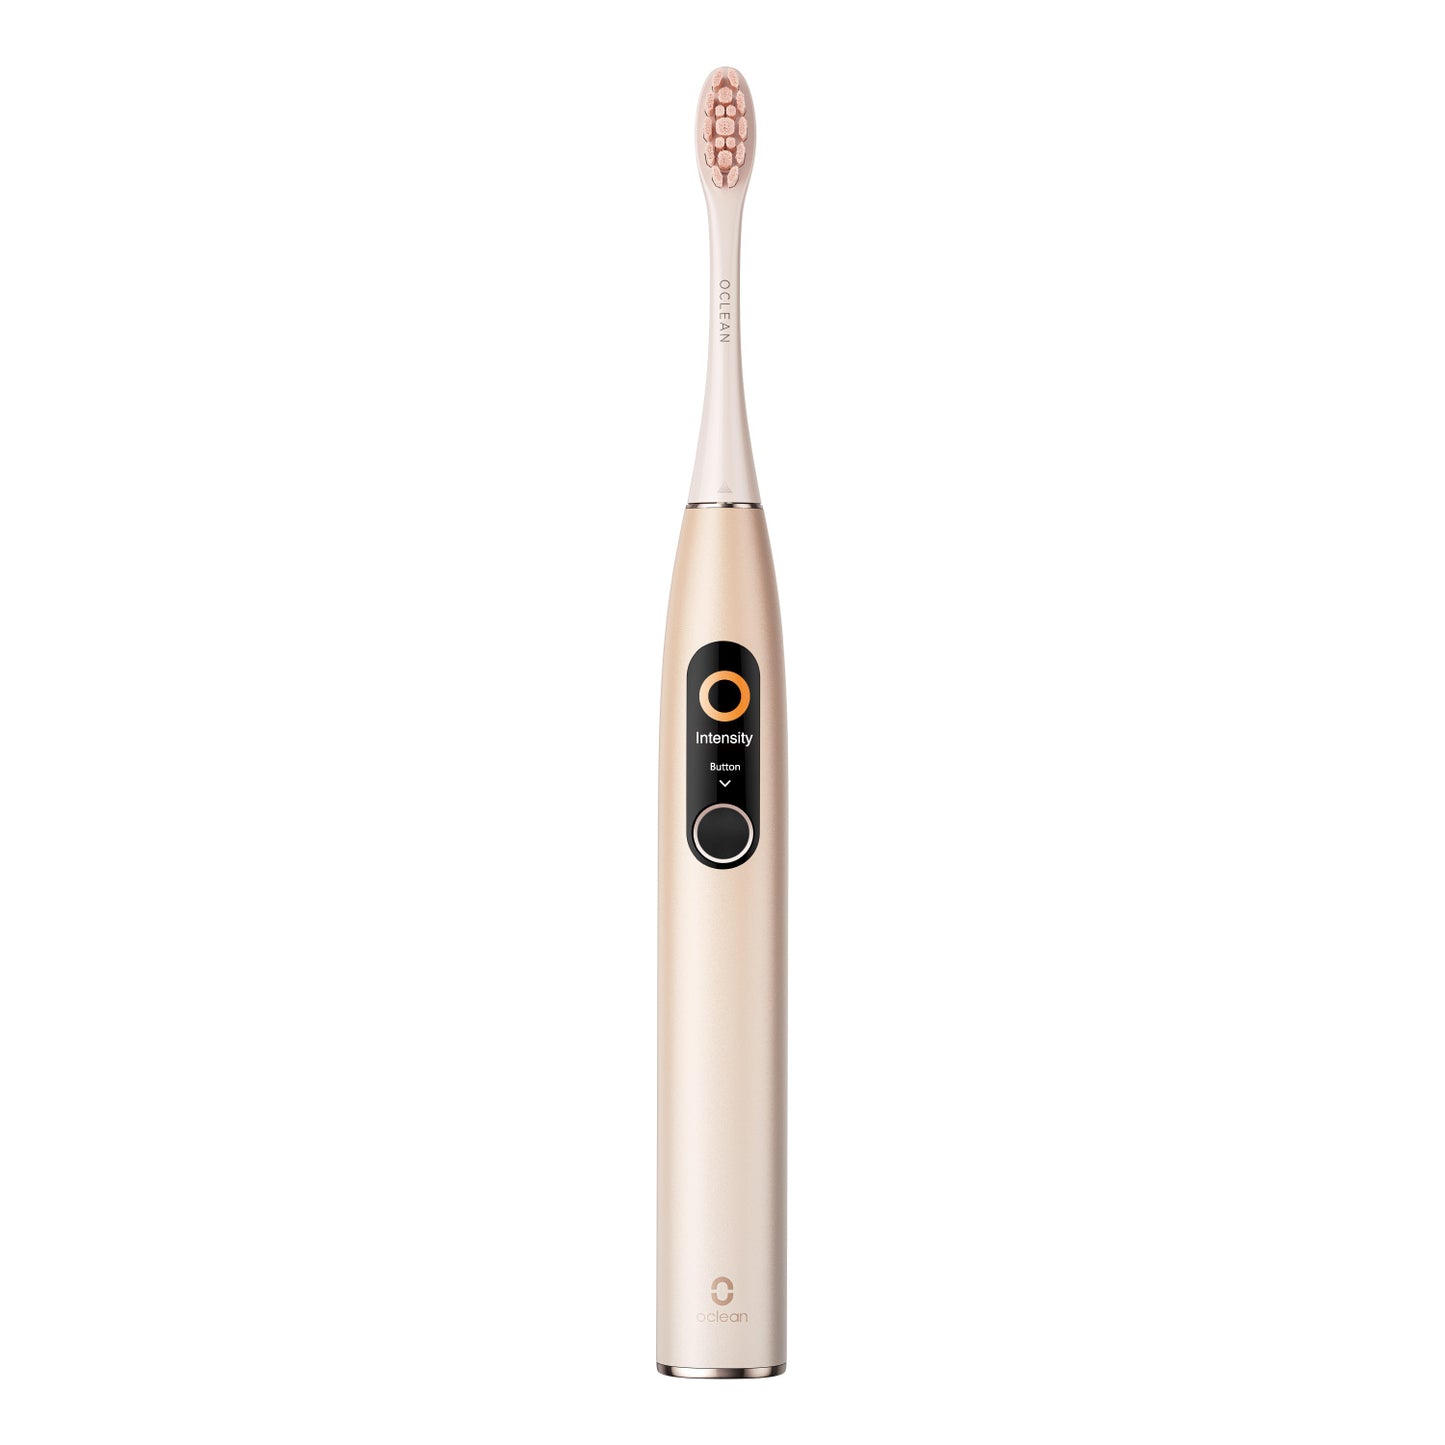 Oclean Flow Sonic Electric Toothbrush Toothbrushes White  Oclean US Store